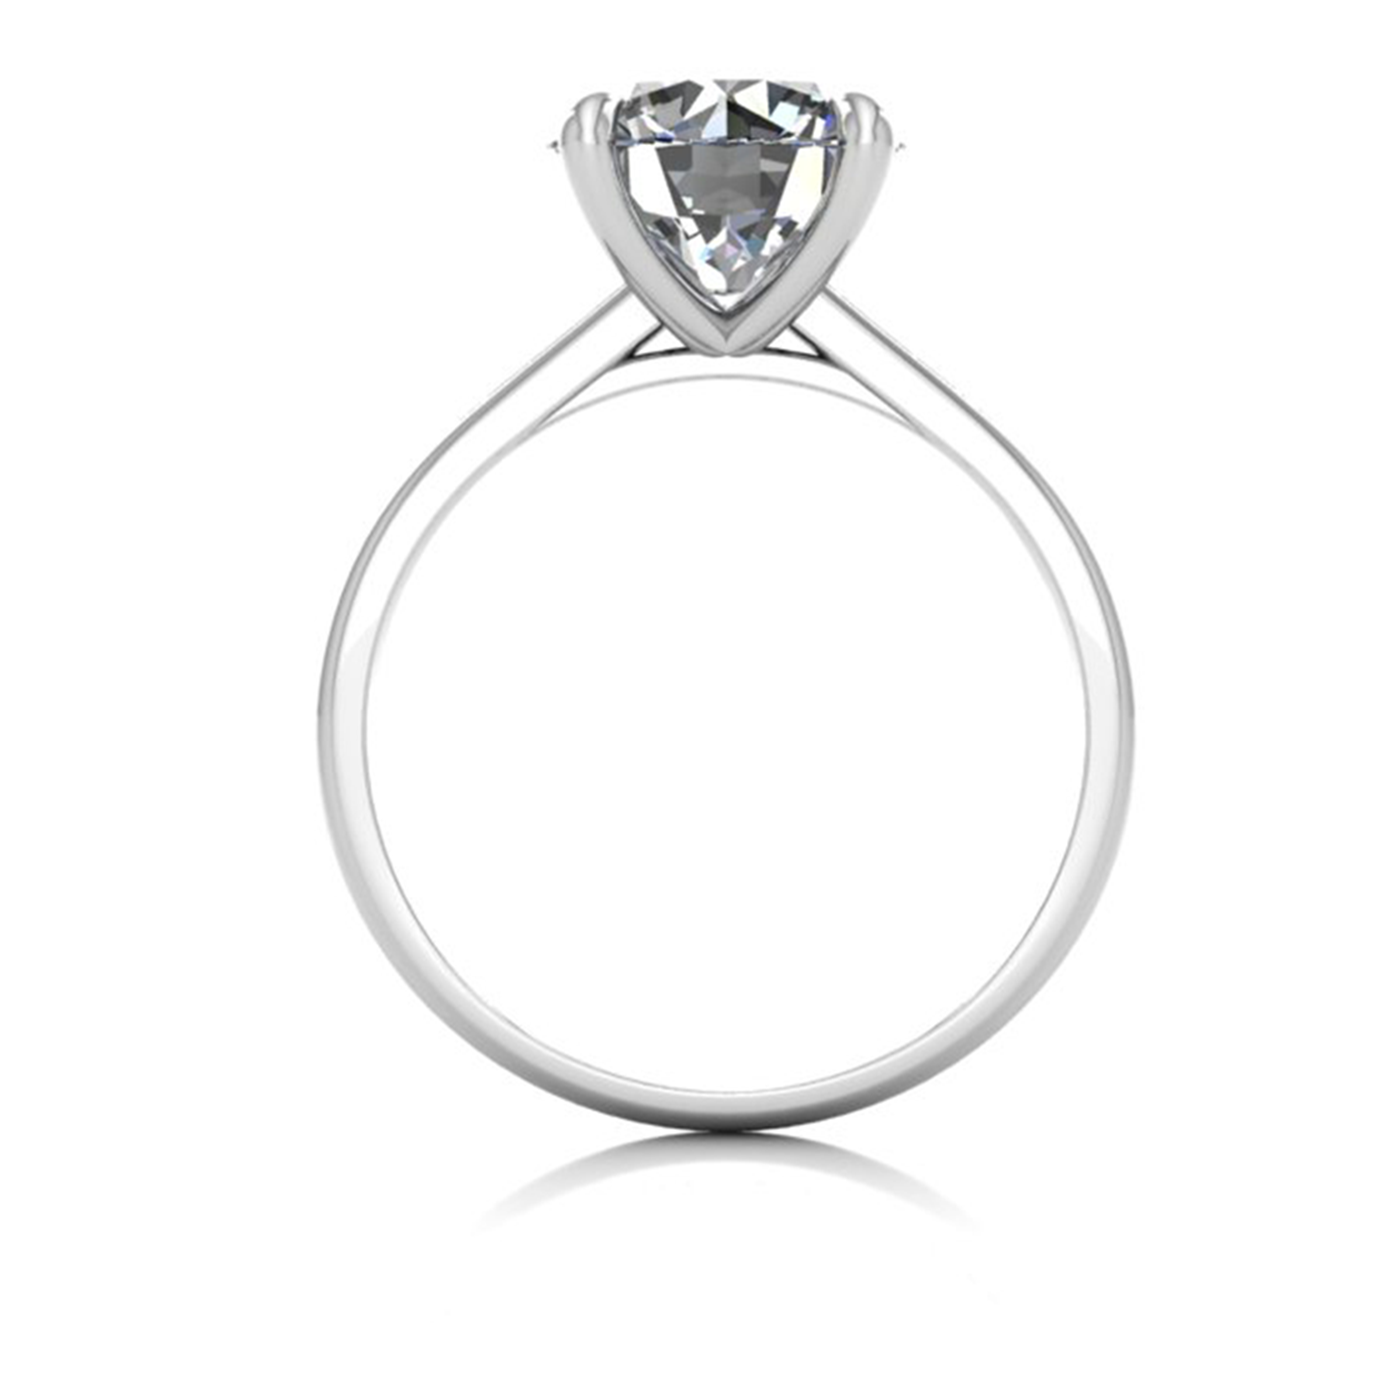 18k white gold 2,50 ct 4 prongs solitaire round cut diamond engagement ring with whisper thin band